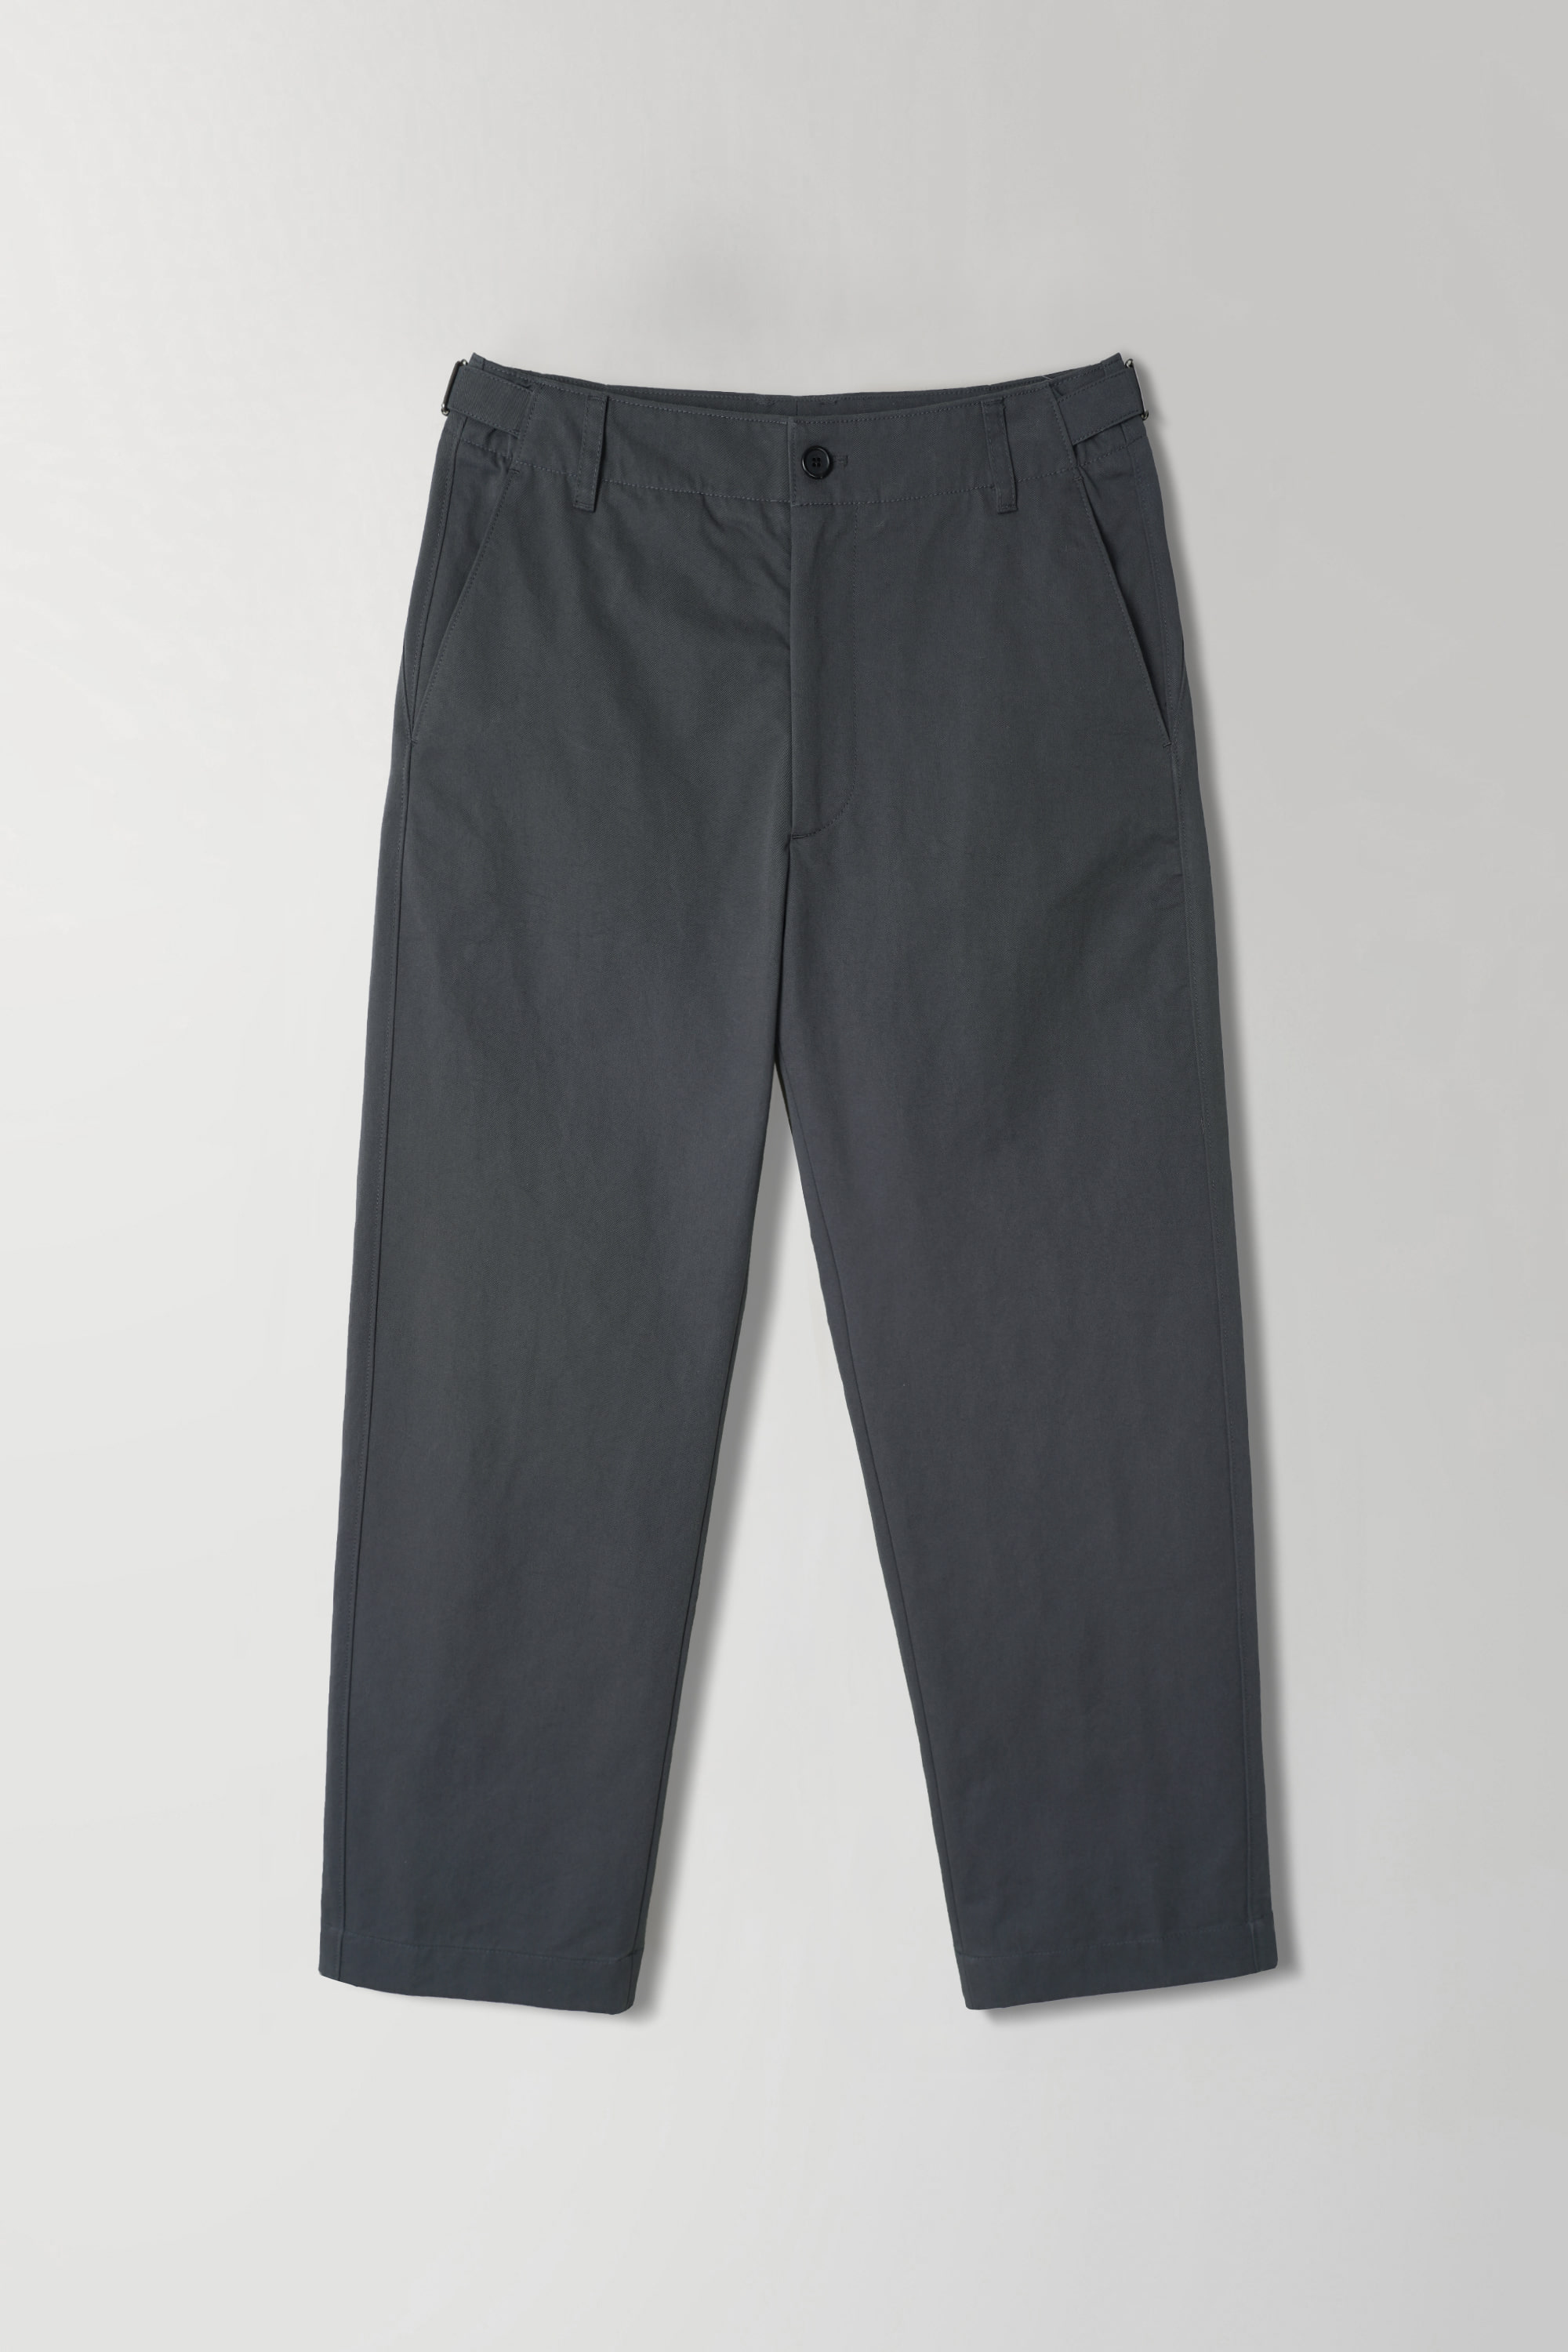 OFFICER CHINO PANTS (TYPE2) - ANTHRACITE